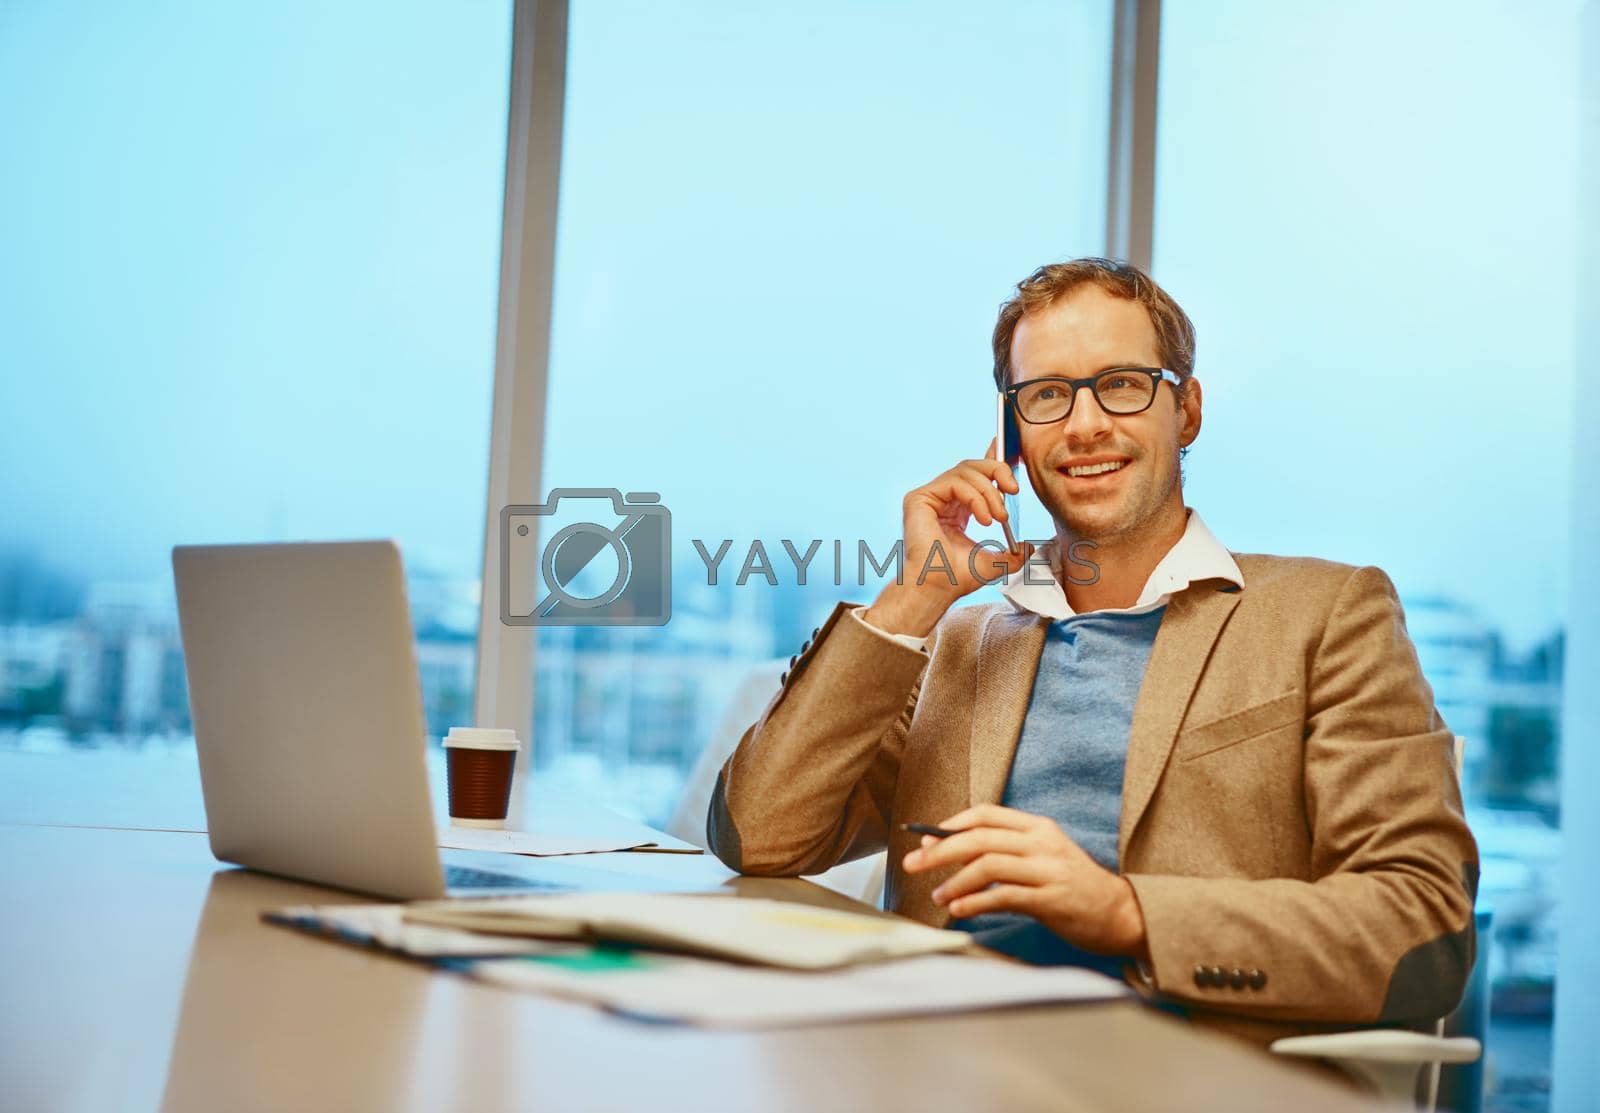 Royalty free image of Its always a pleasure to hear from you. a handsome male designer working at his desk in the office. by YuriArcurs